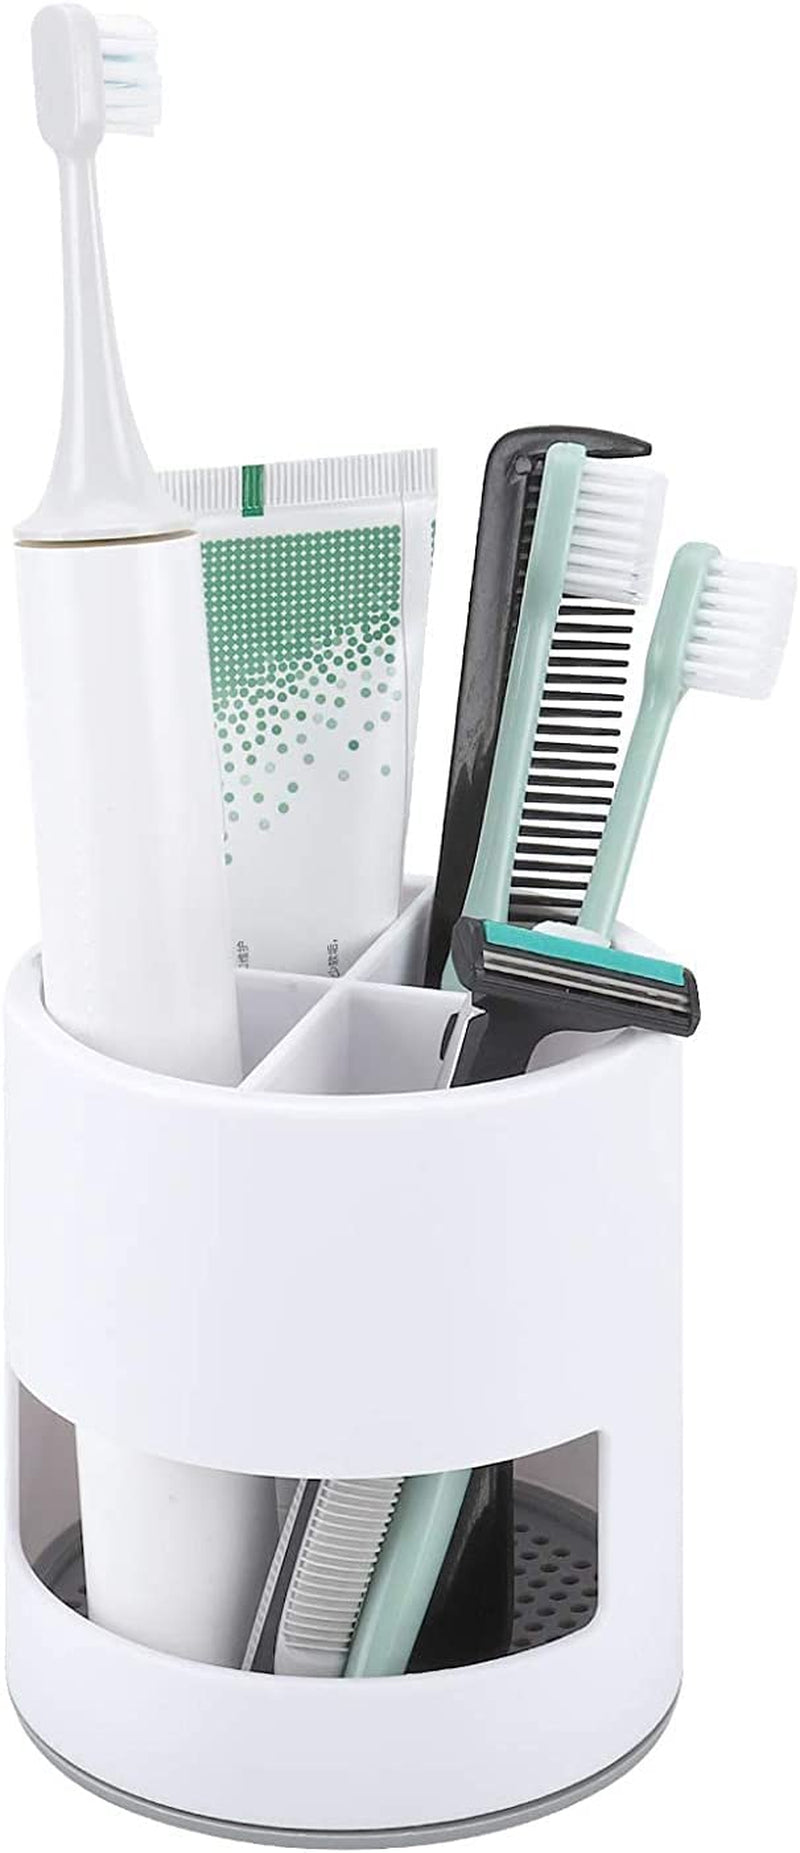 Toothbrush Holder, Ventilated Mould-Proof Toothbrush Caddy, Tough Small Toothbrush Pot Stand for Easy Bathroom Storage, White